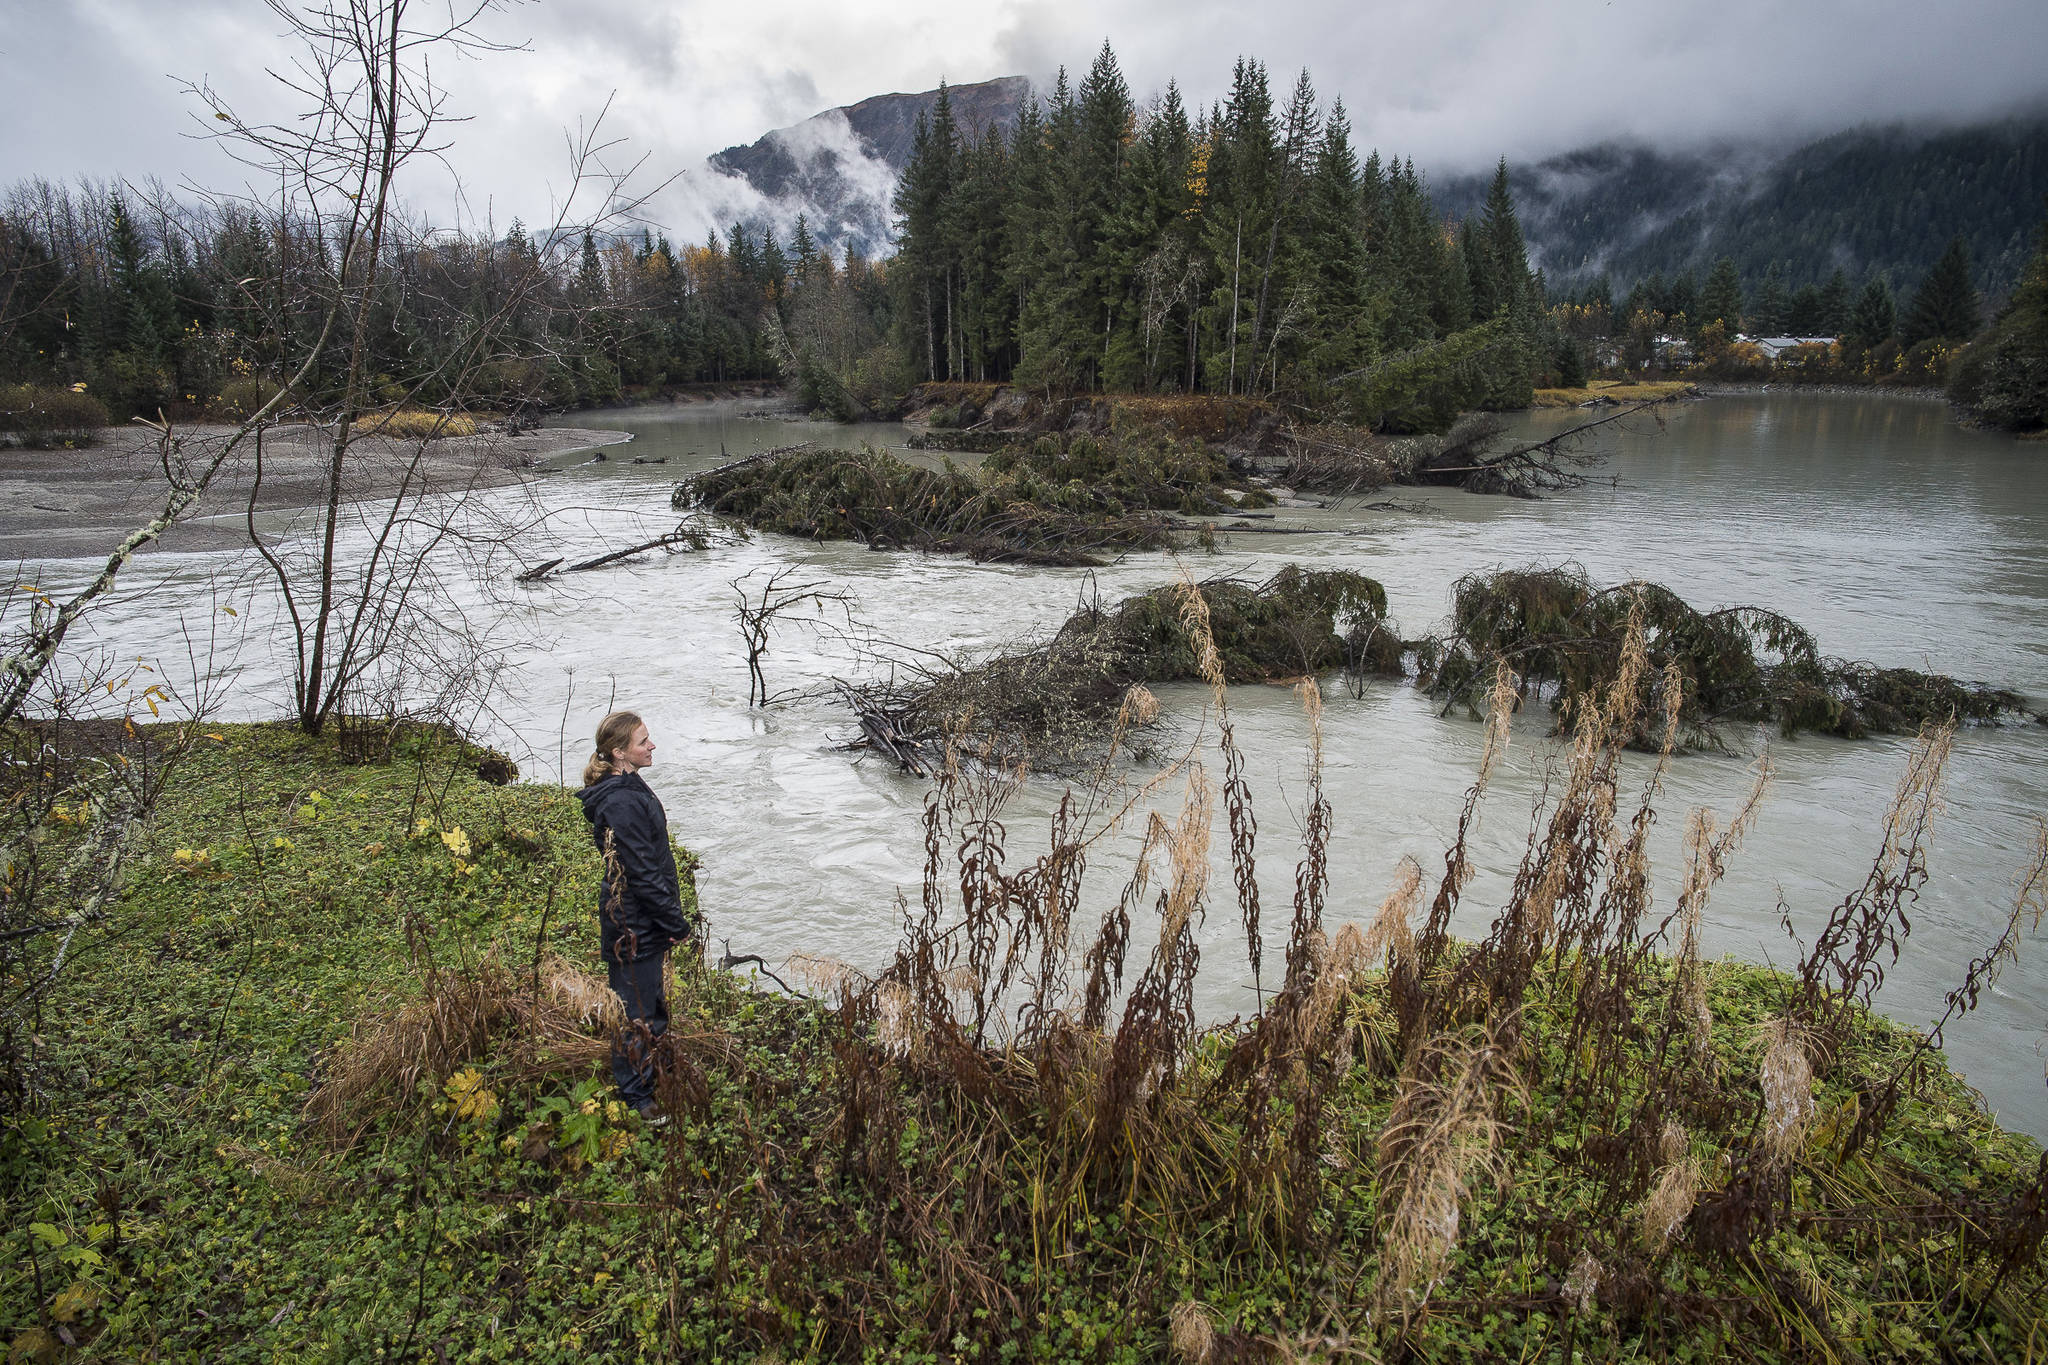 Sonia Nagorski, assistant professor of Geology Arts and Sciences at the University of Alaska Southeast, investigates the broken oxbow along the Mendenhall River on Wednesday, Oct. 17, 2018. The river cut through the meander bend just north of the Brotherhood Bridge last this summer. (Michael Penn | Juneau Empire)